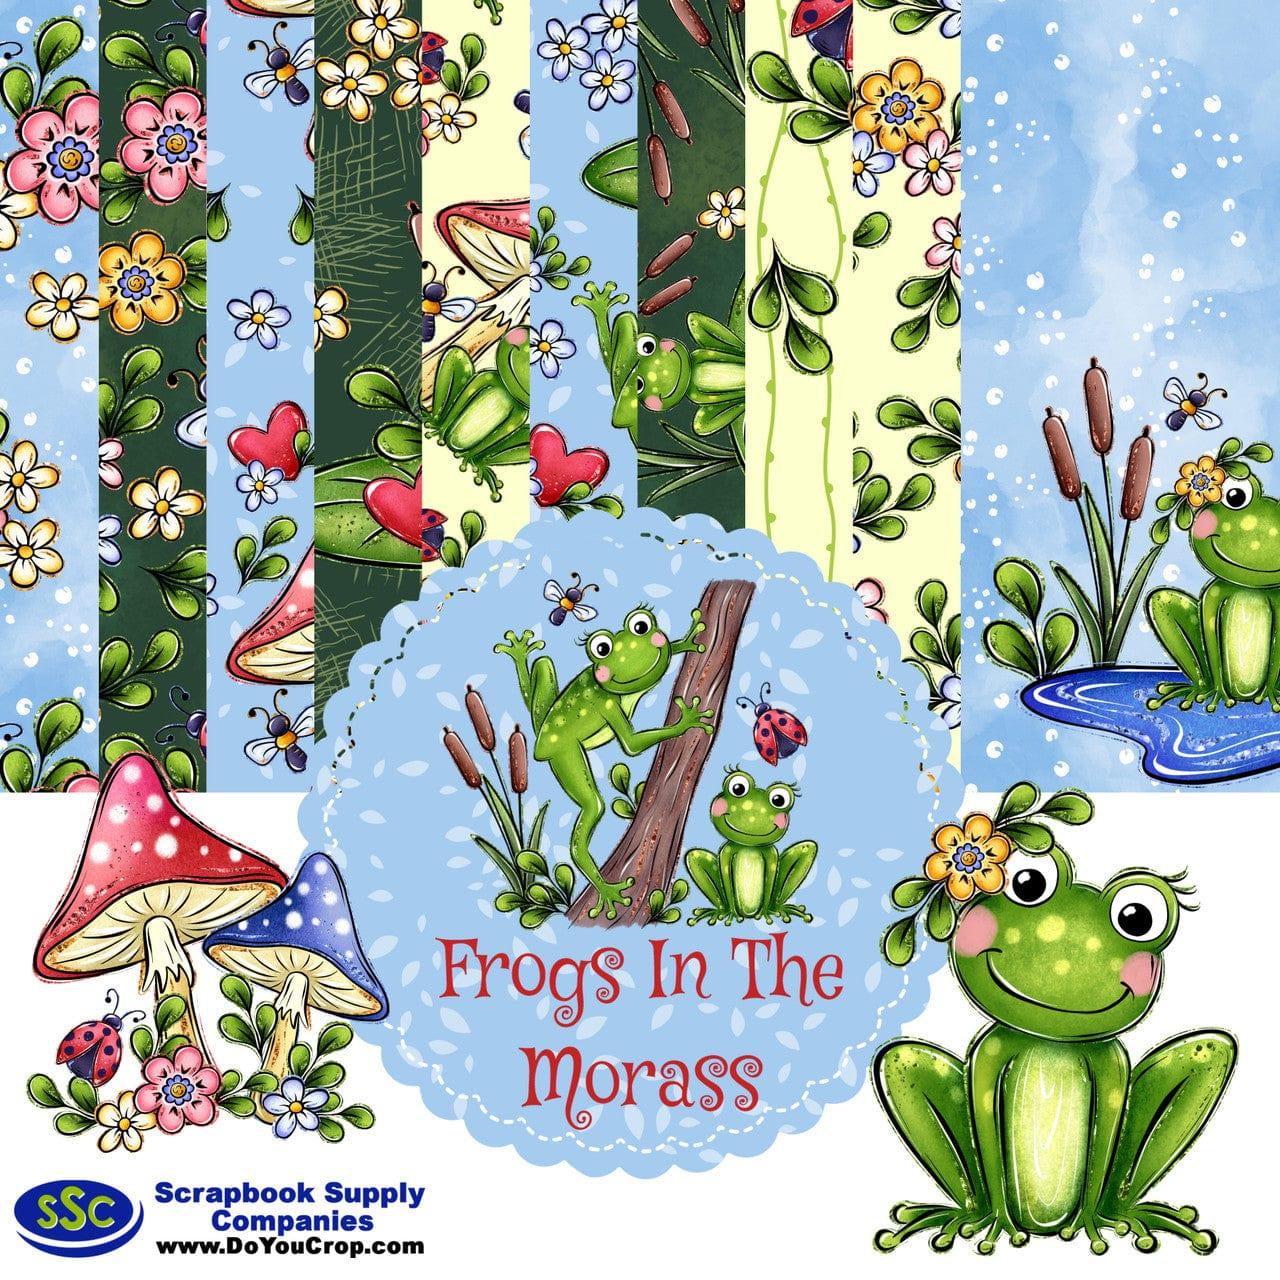 Frogs In The Morass 12 x 12 Scrapbook Paper & Embellishment Kit by SSC Designs